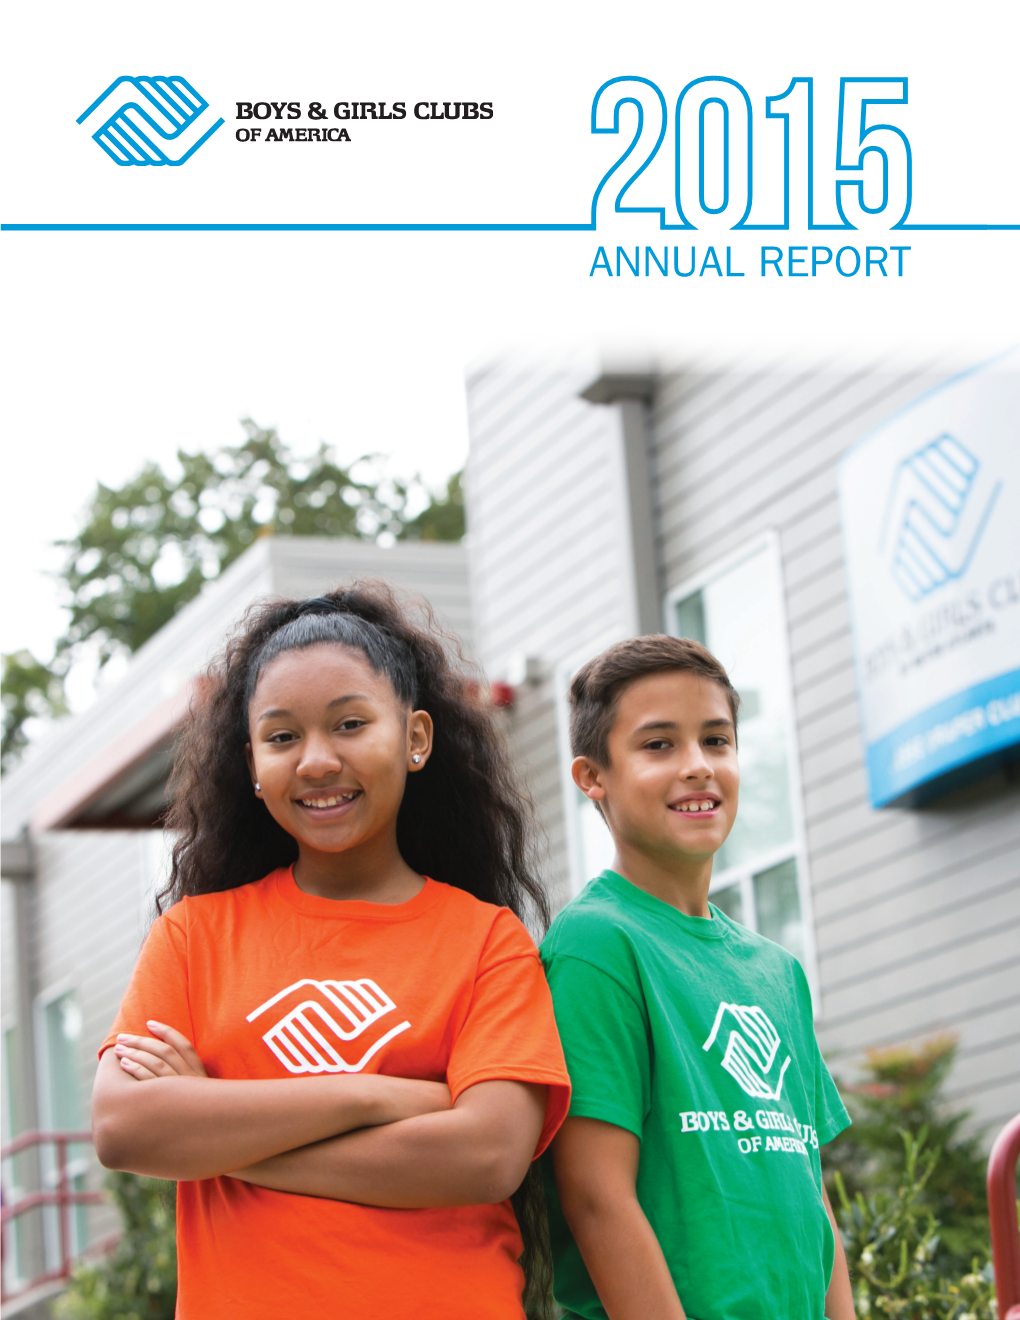 ANNUAL REPORT 2 | Boys & Girls Clubs of America OFFICER’S LETTER